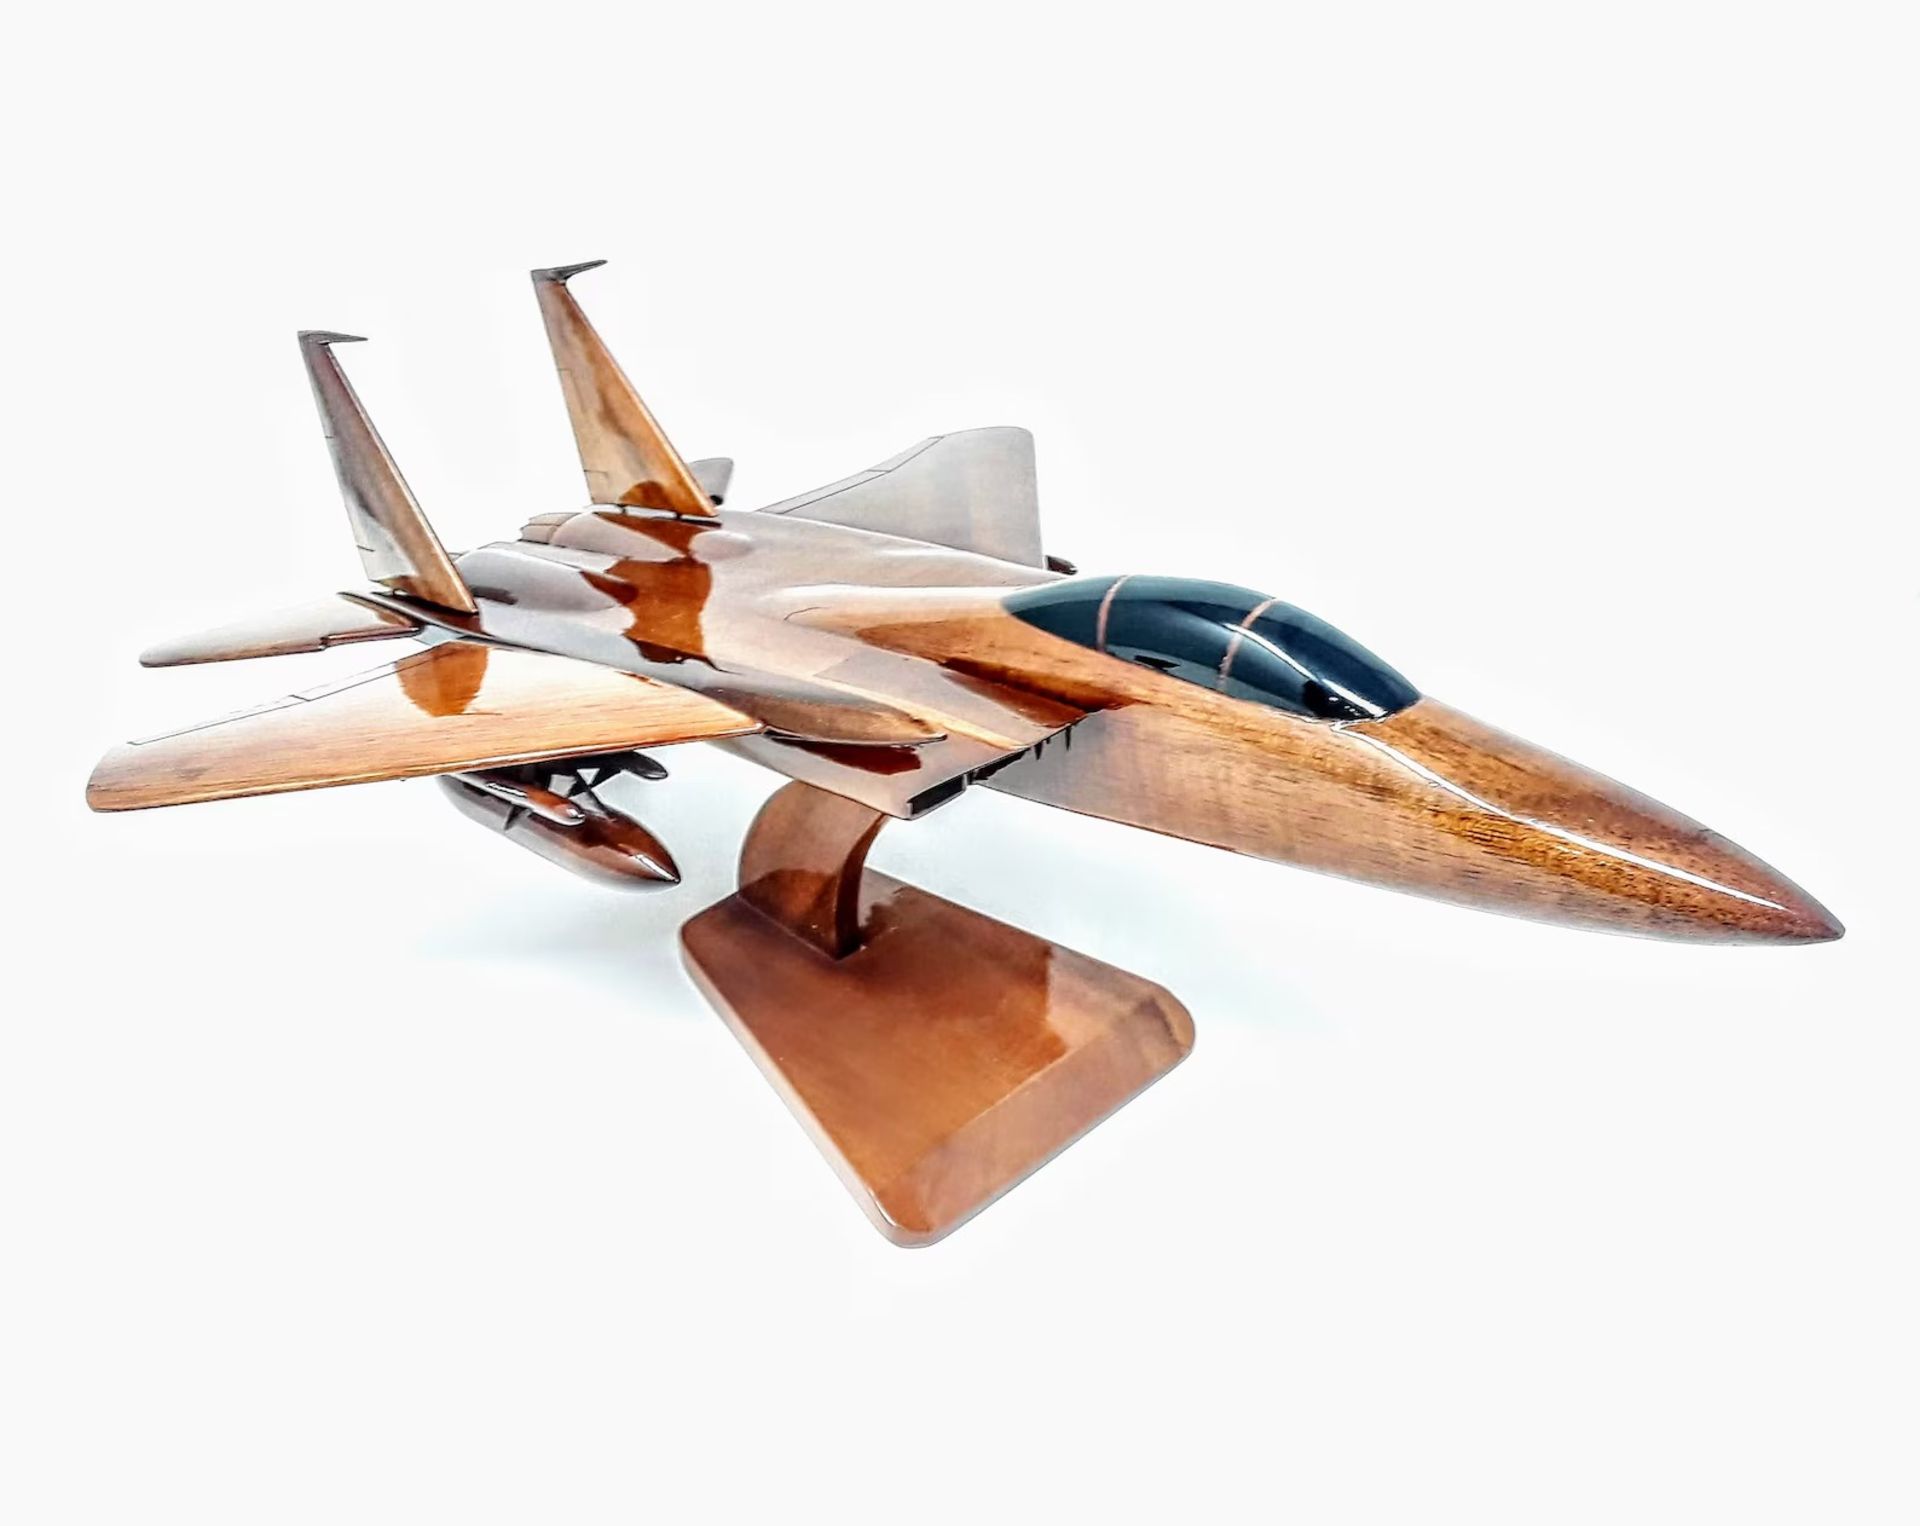 F15 Eagle Wooden Scale Desk Display - Image 2 of 5